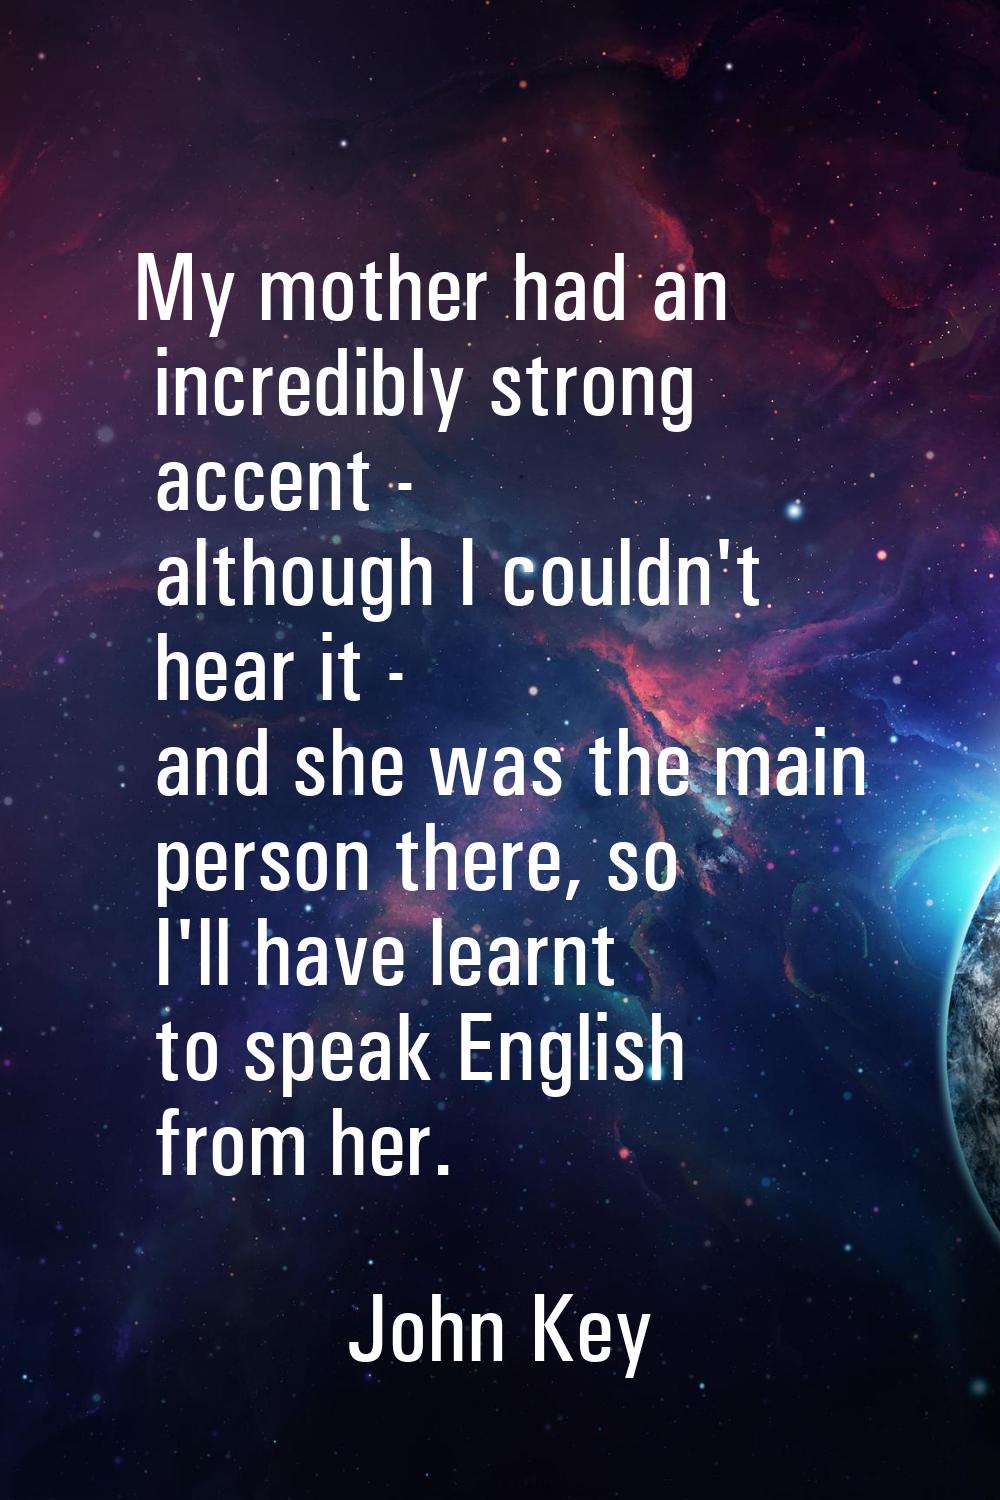 My mother had an incredibly strong accent - although I couldn't hear it - and she was the main pers